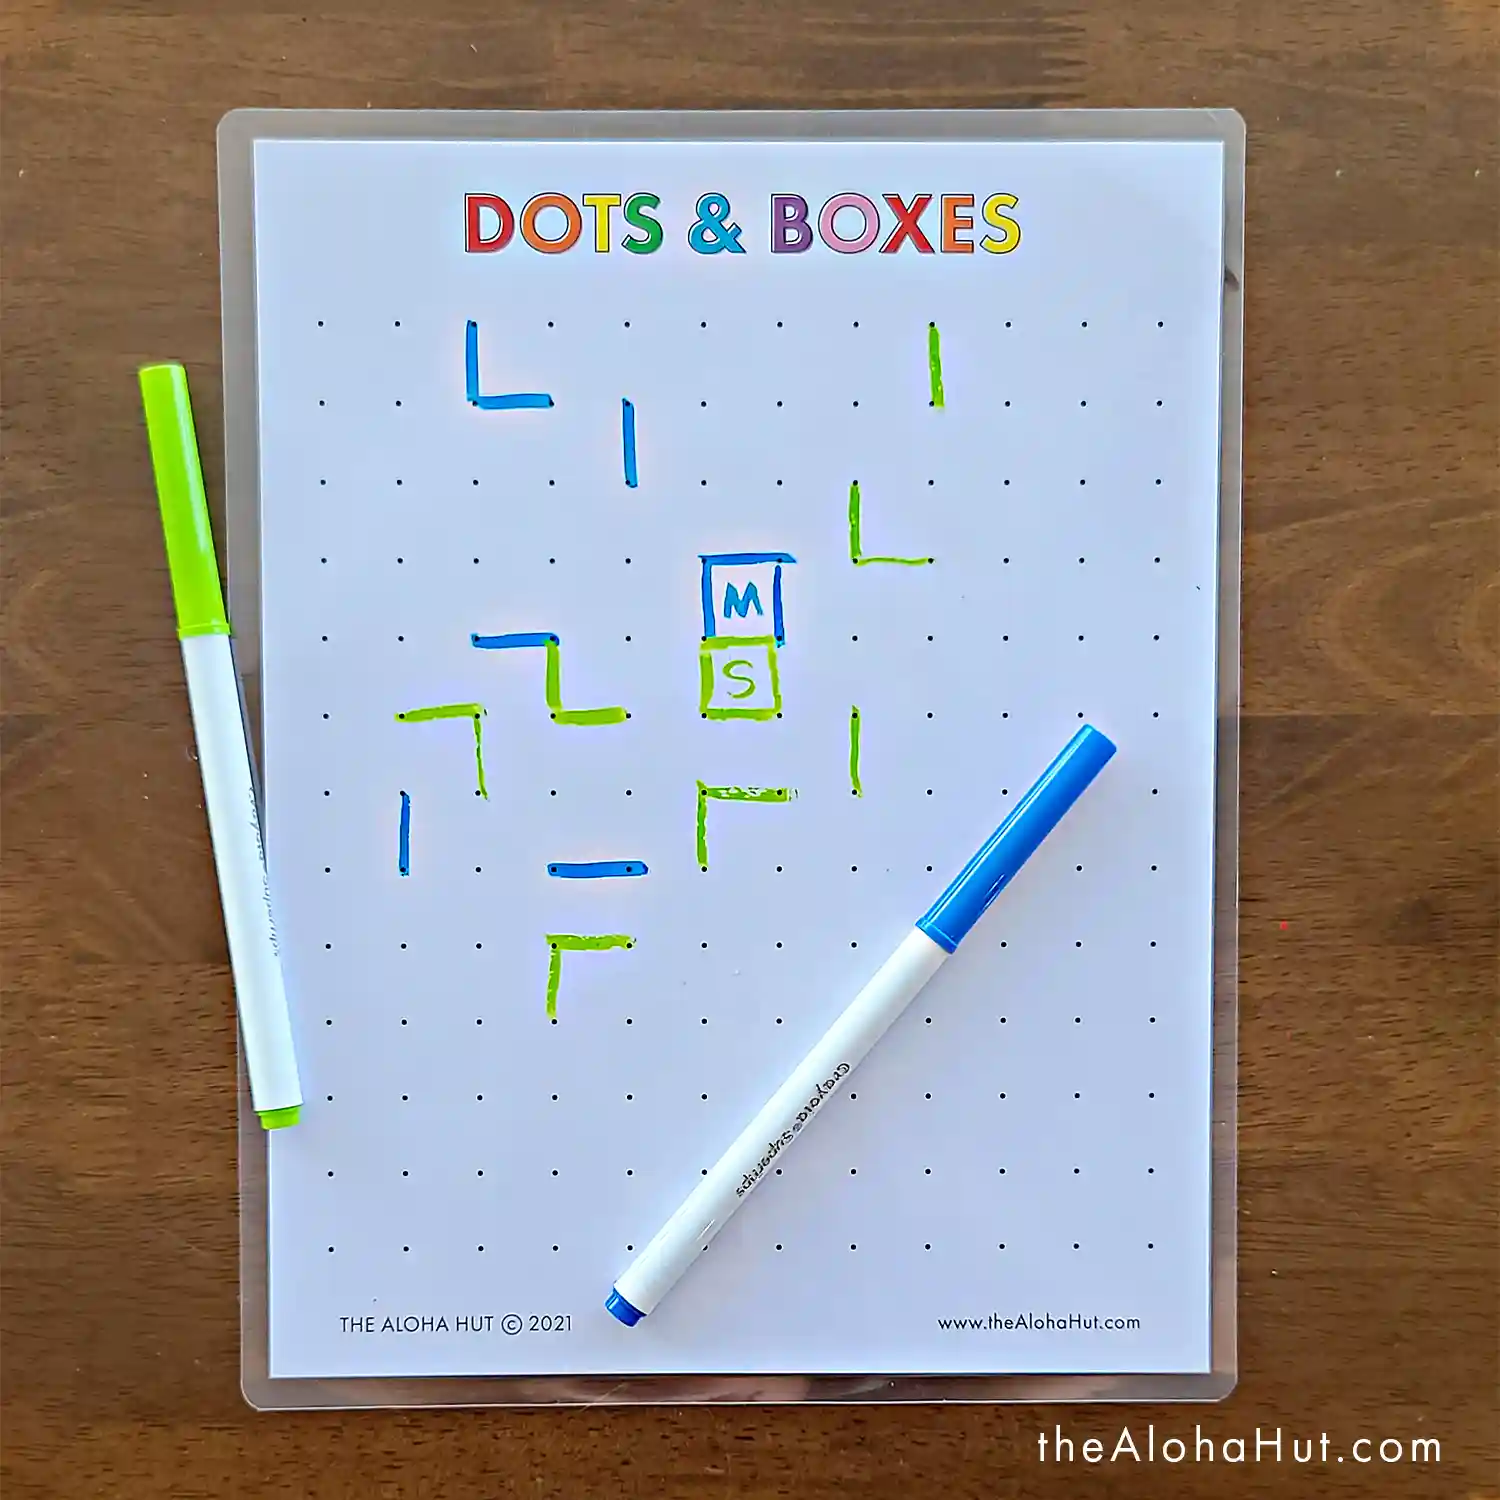 DIY Portable Road Trip Kits - 10 Free Printable Activity Pages - Travel Games - Dots & Boxes Game